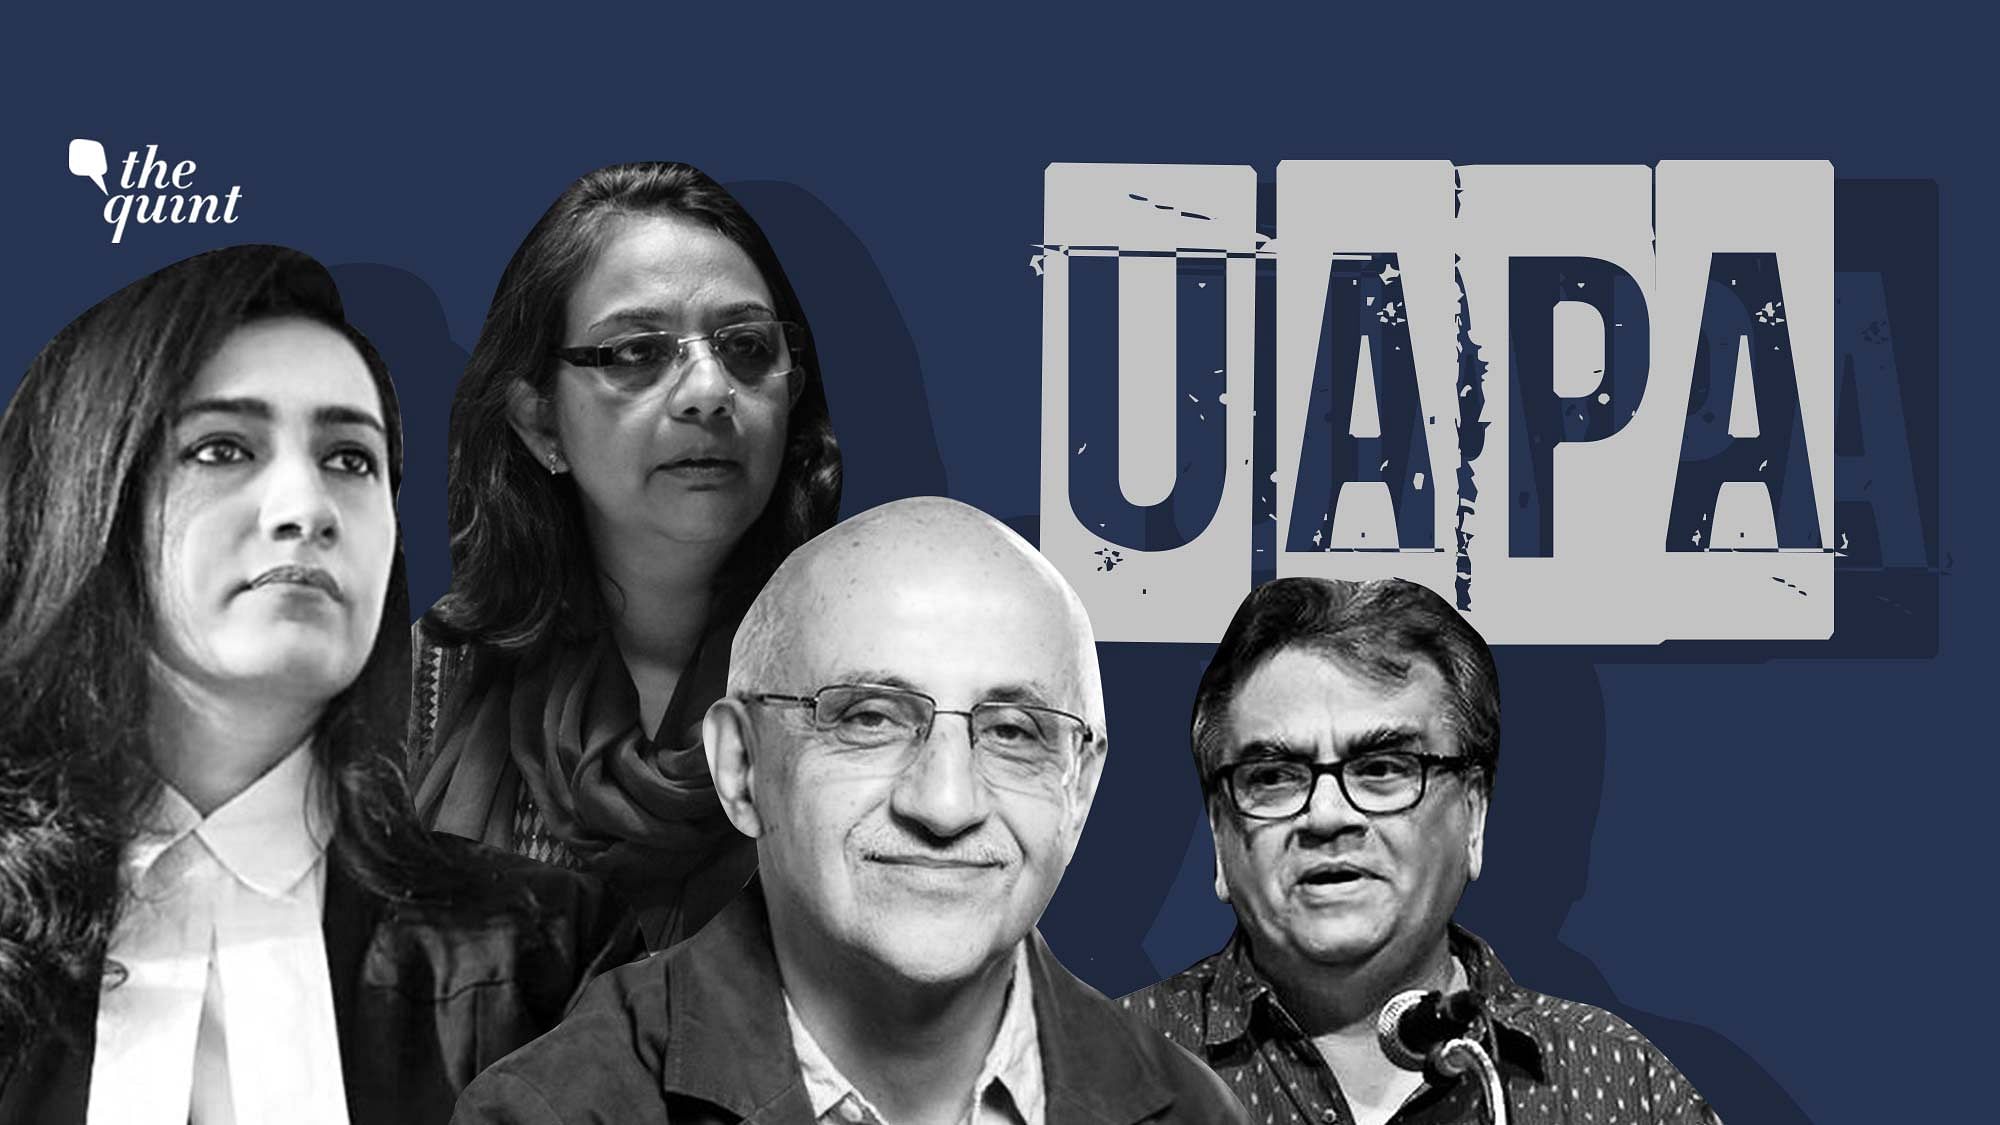 Karuna Nundy, Harsh Mander, Mihir Desai and Anuradha Bhasin weighed in on why the recent UAPA cases are dangerous.